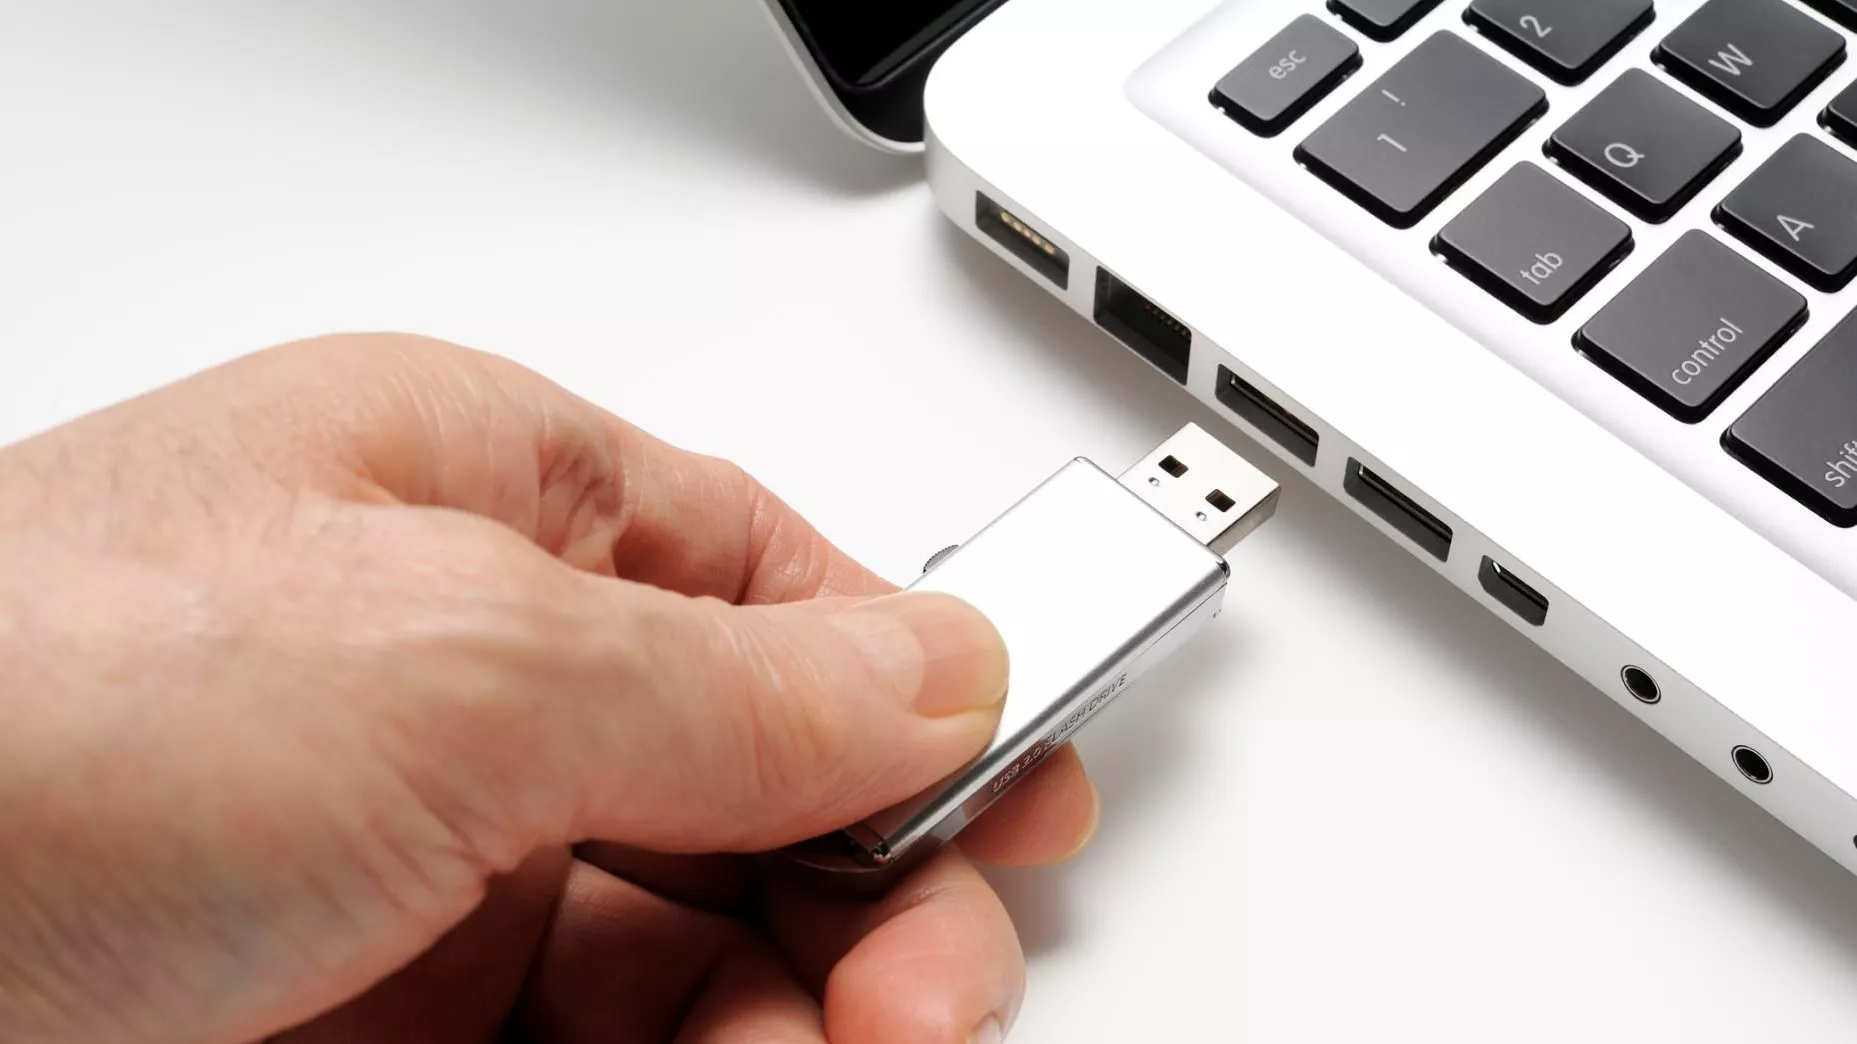 Protect Your Usb Stick From Malware With These Essential Tips